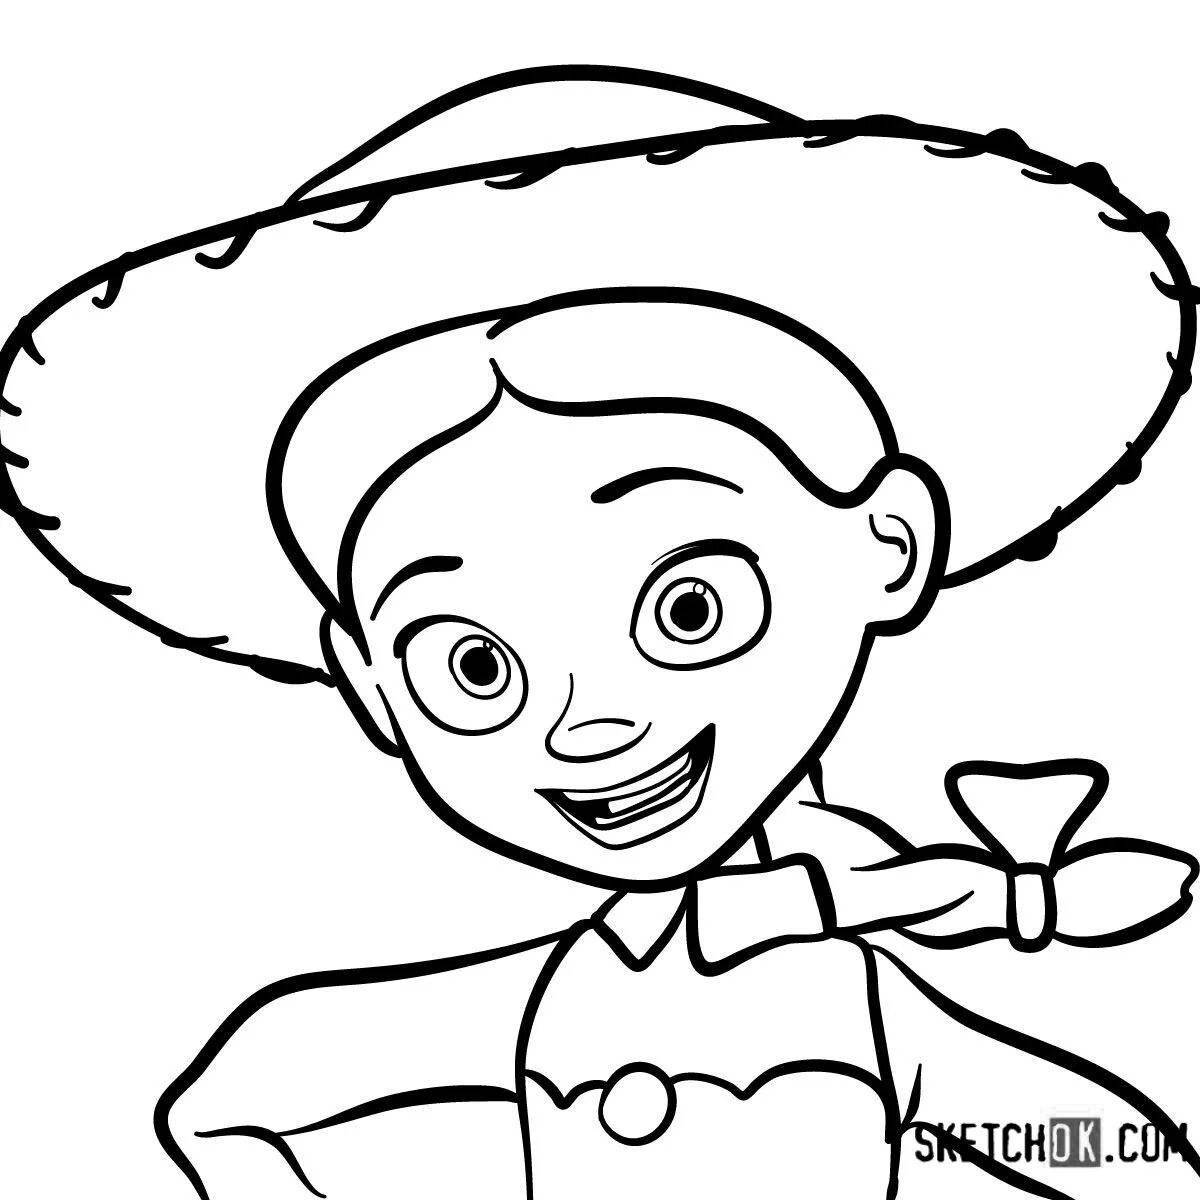 Jesse's fairy tale toy story coloring book